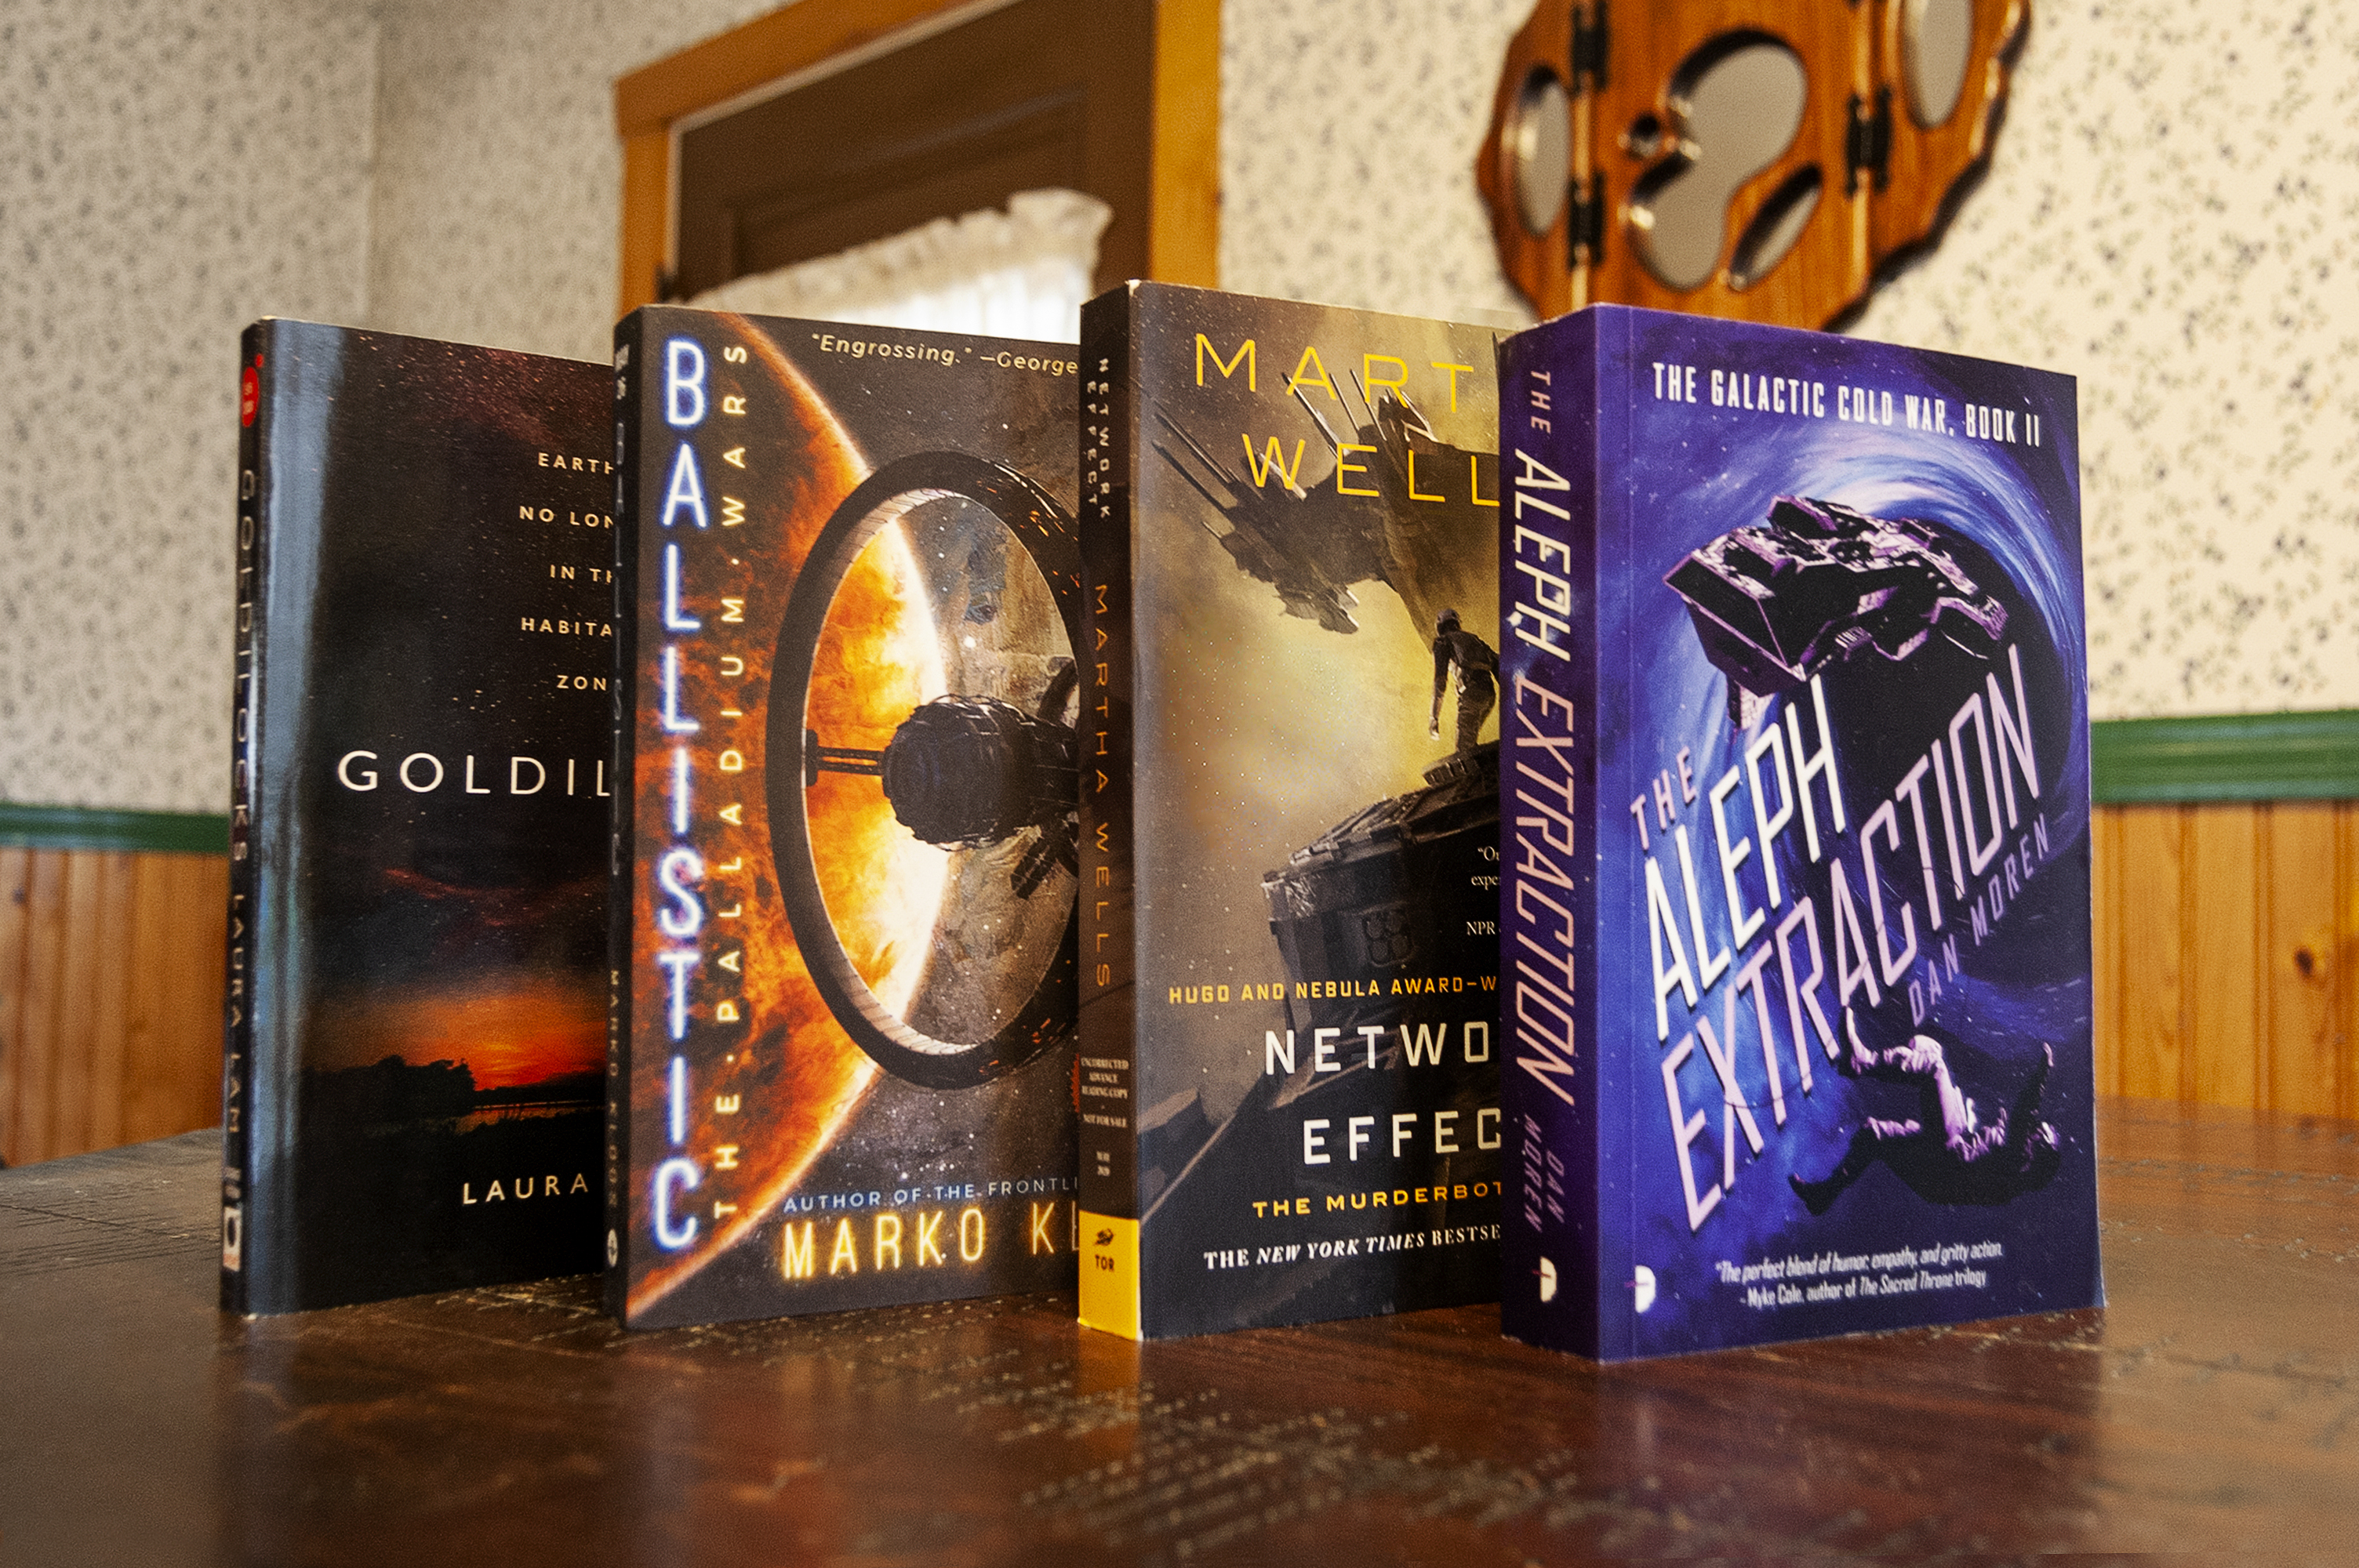 Four science fiction books upright on a book shop counter